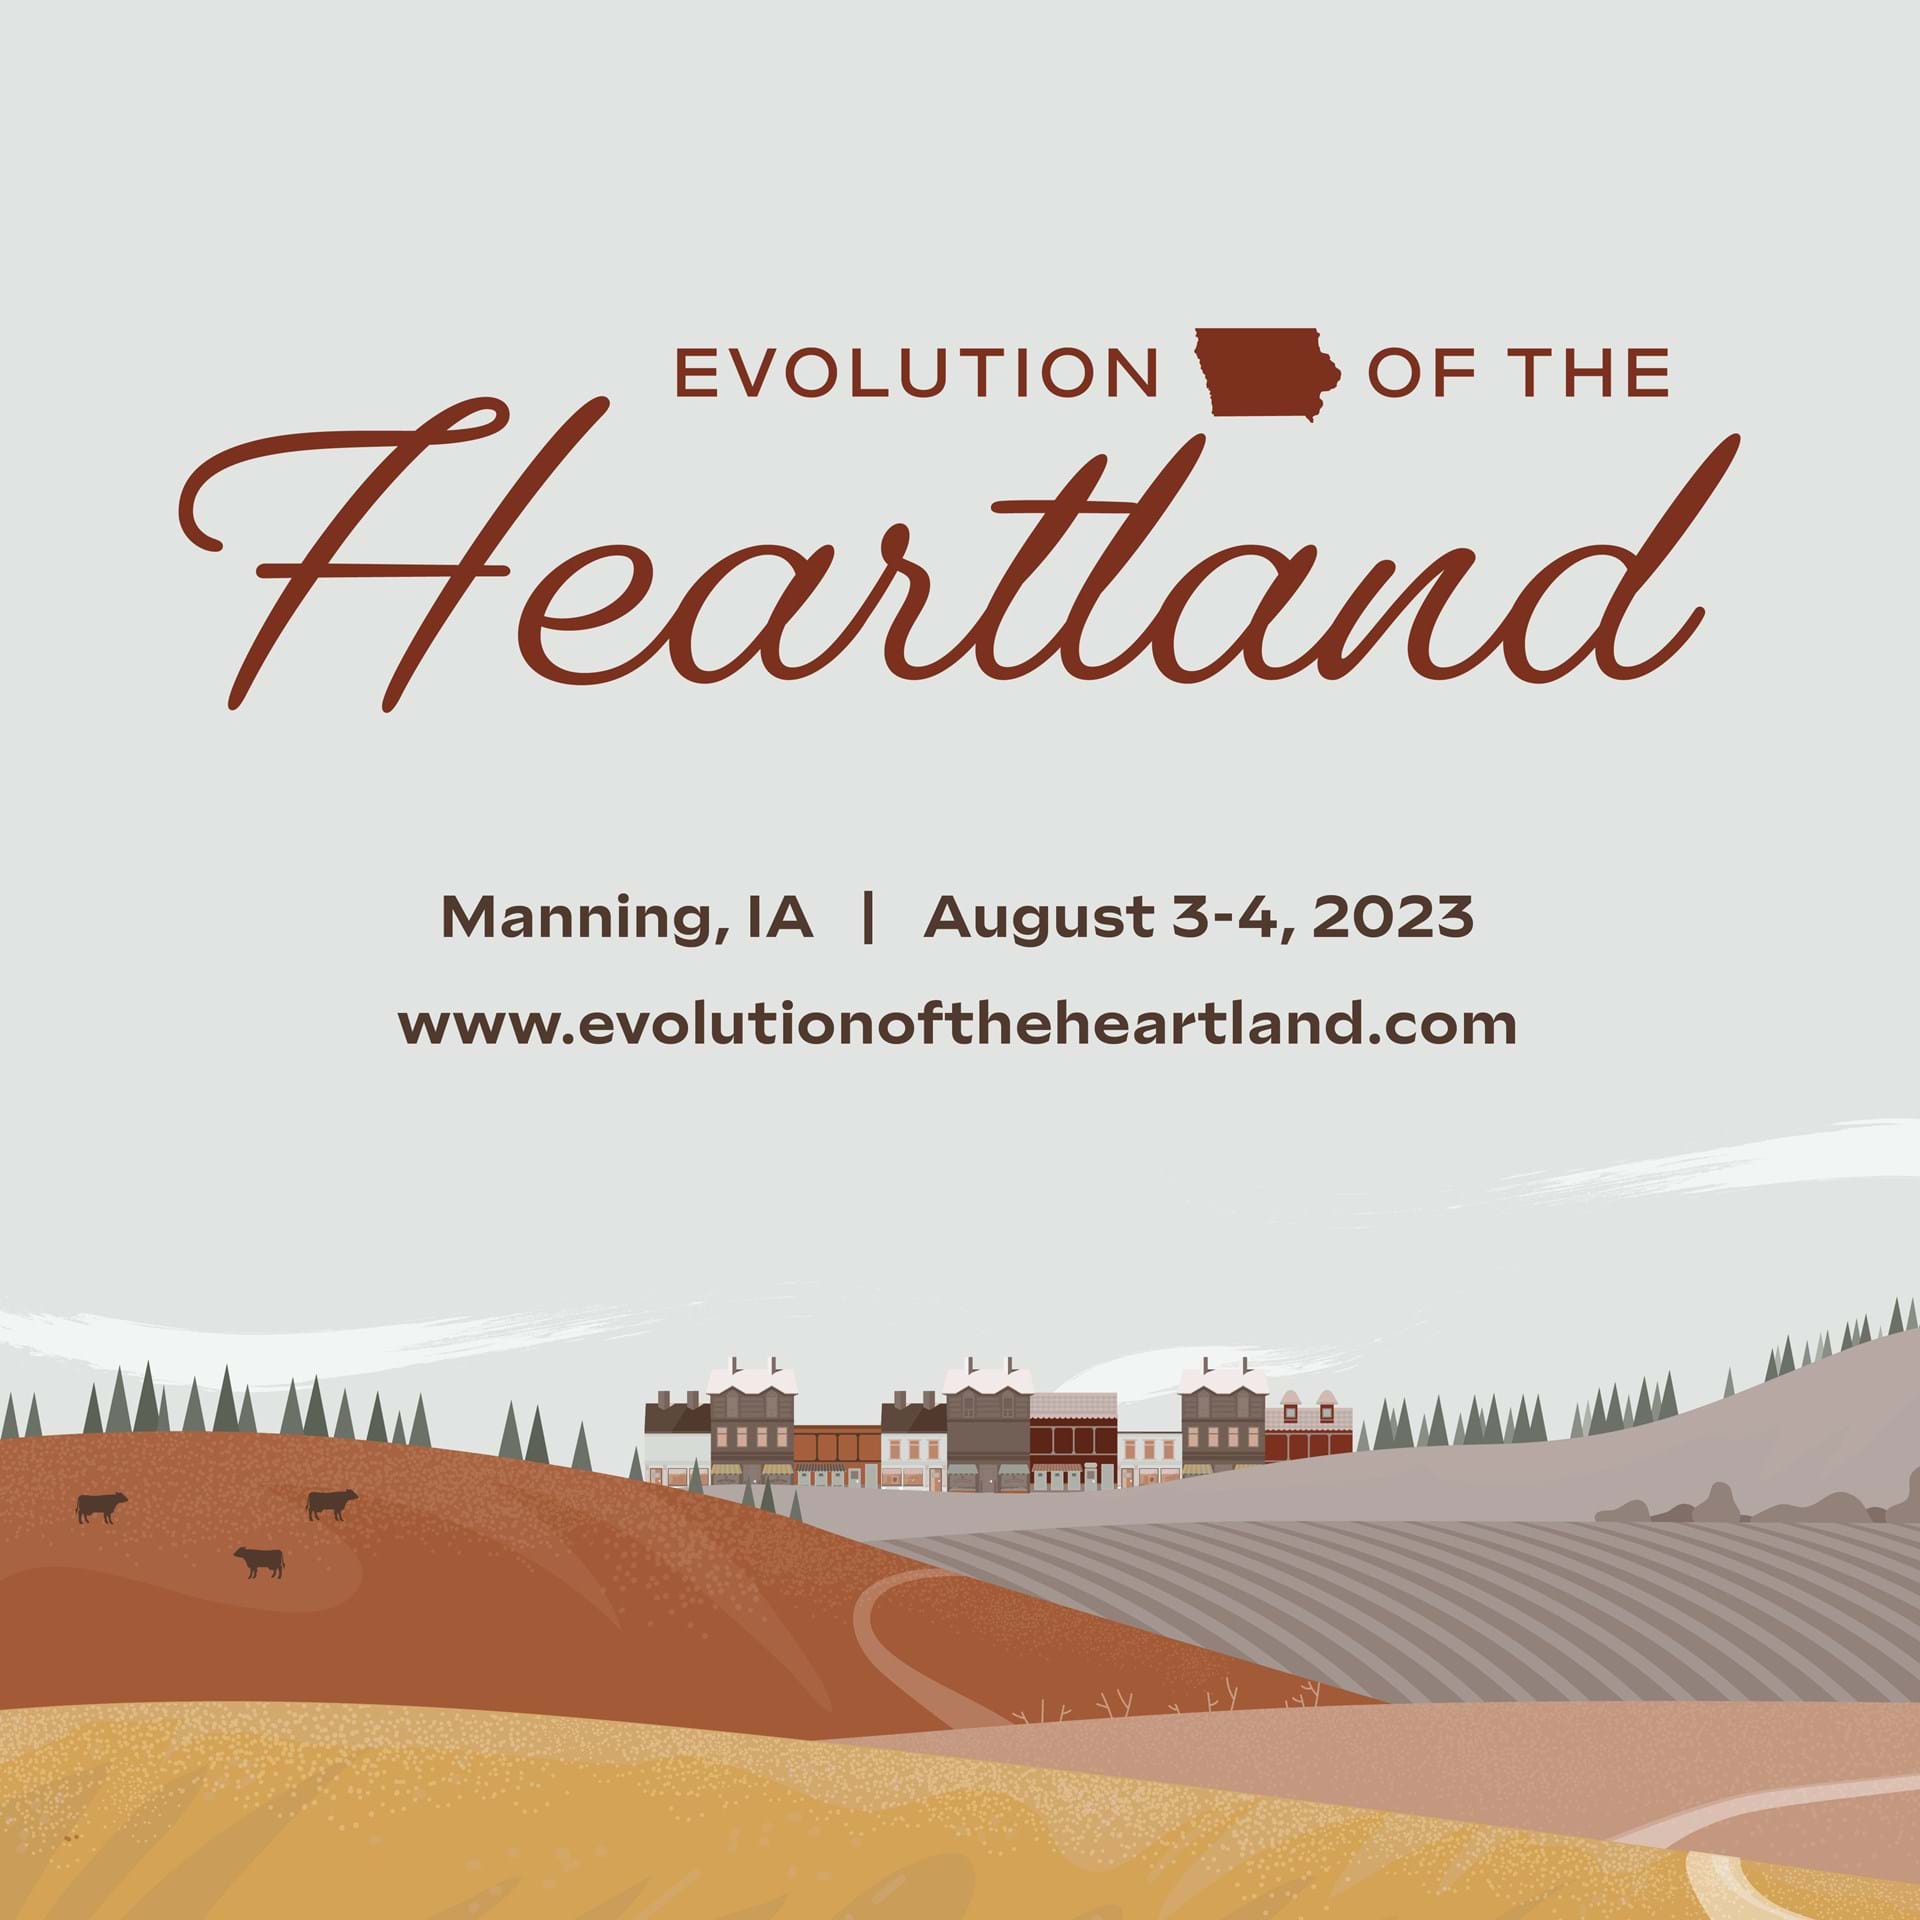 Evolution of the Heartland August 3-4, 2023